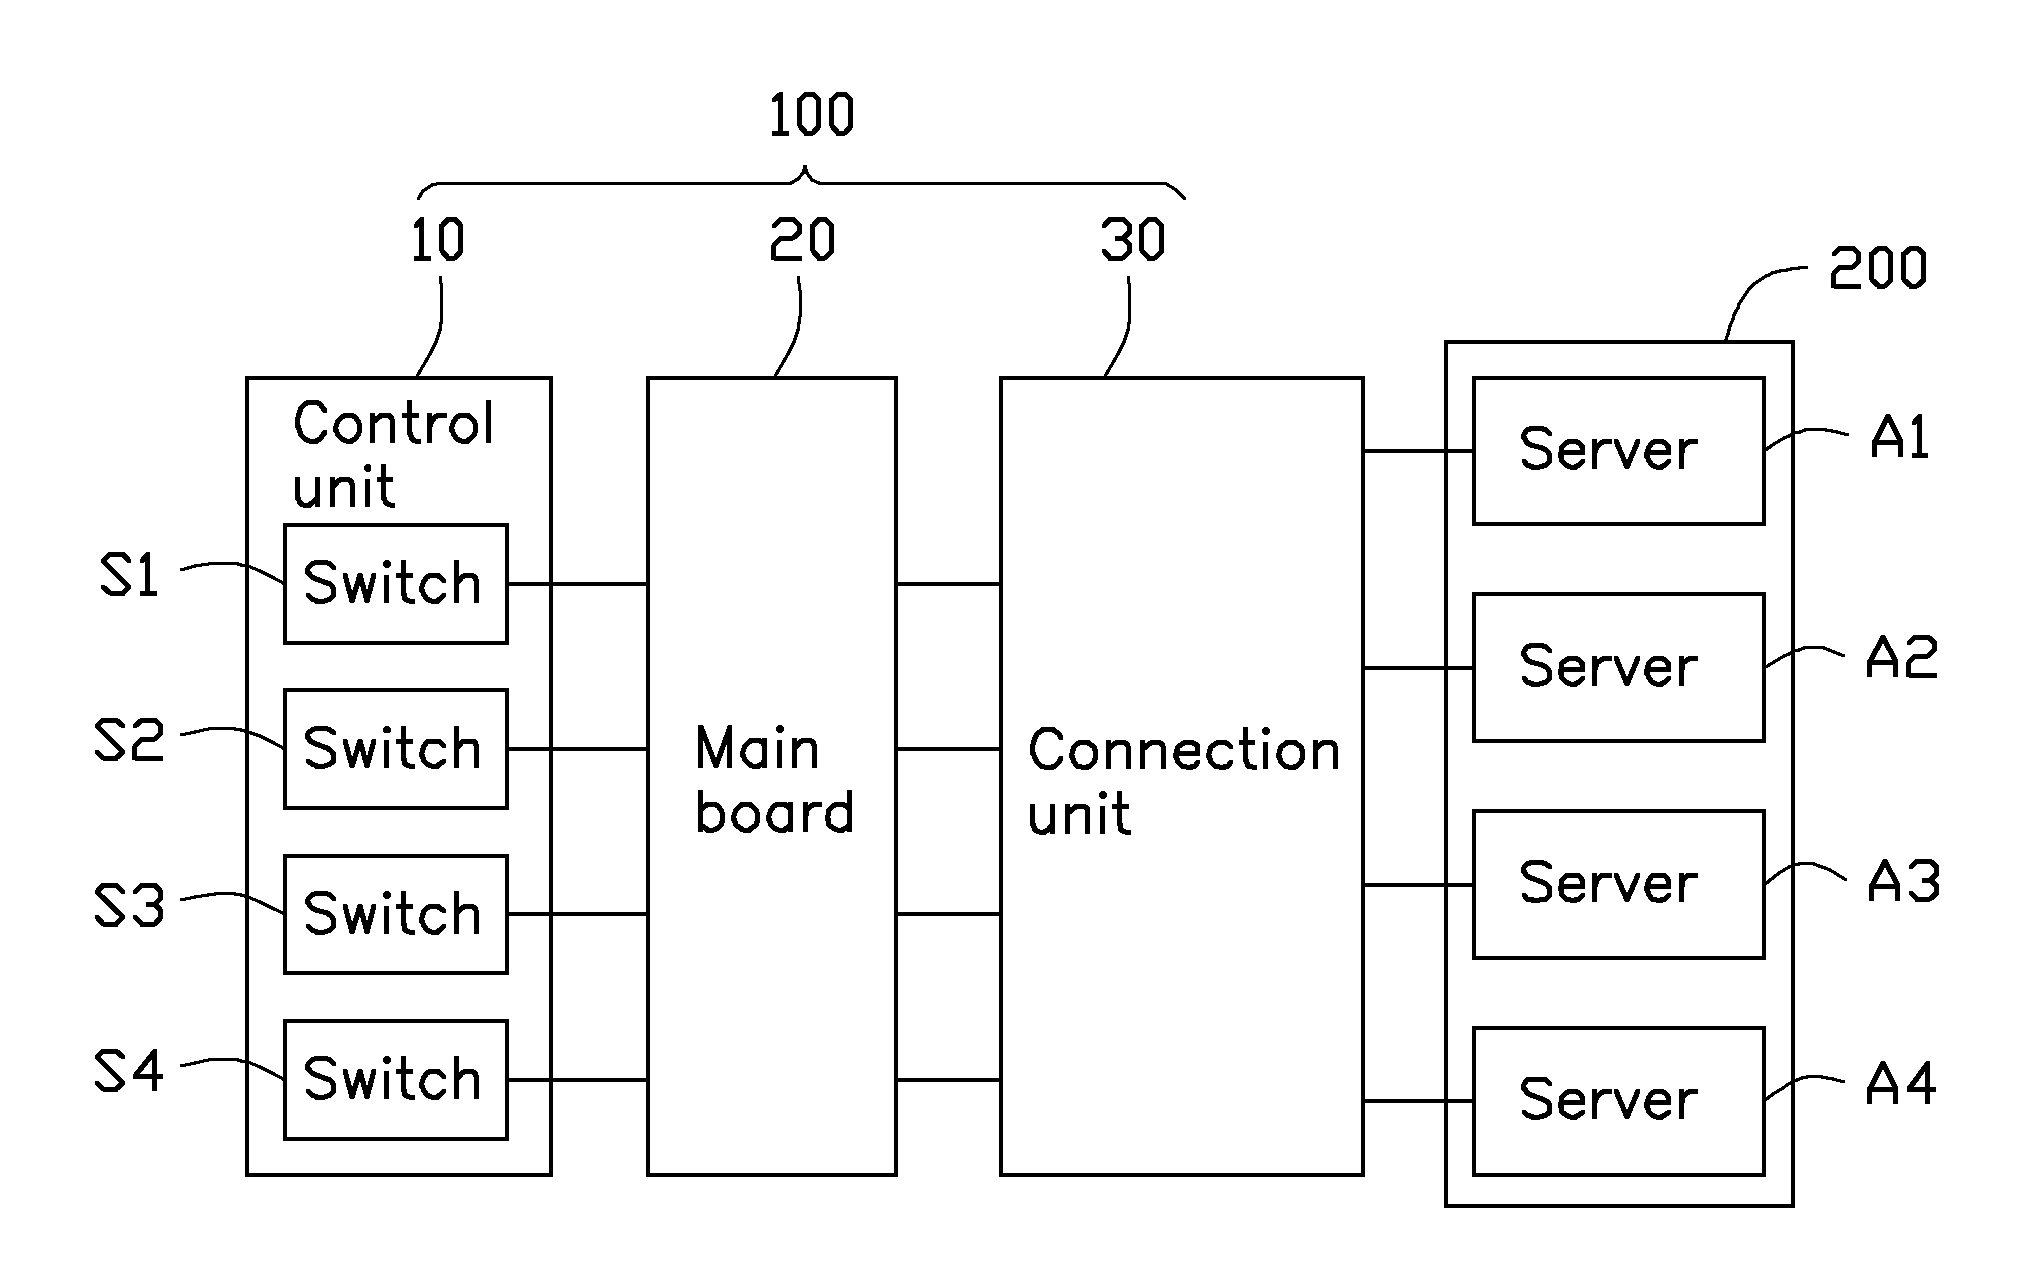 Power supply device for computer systems